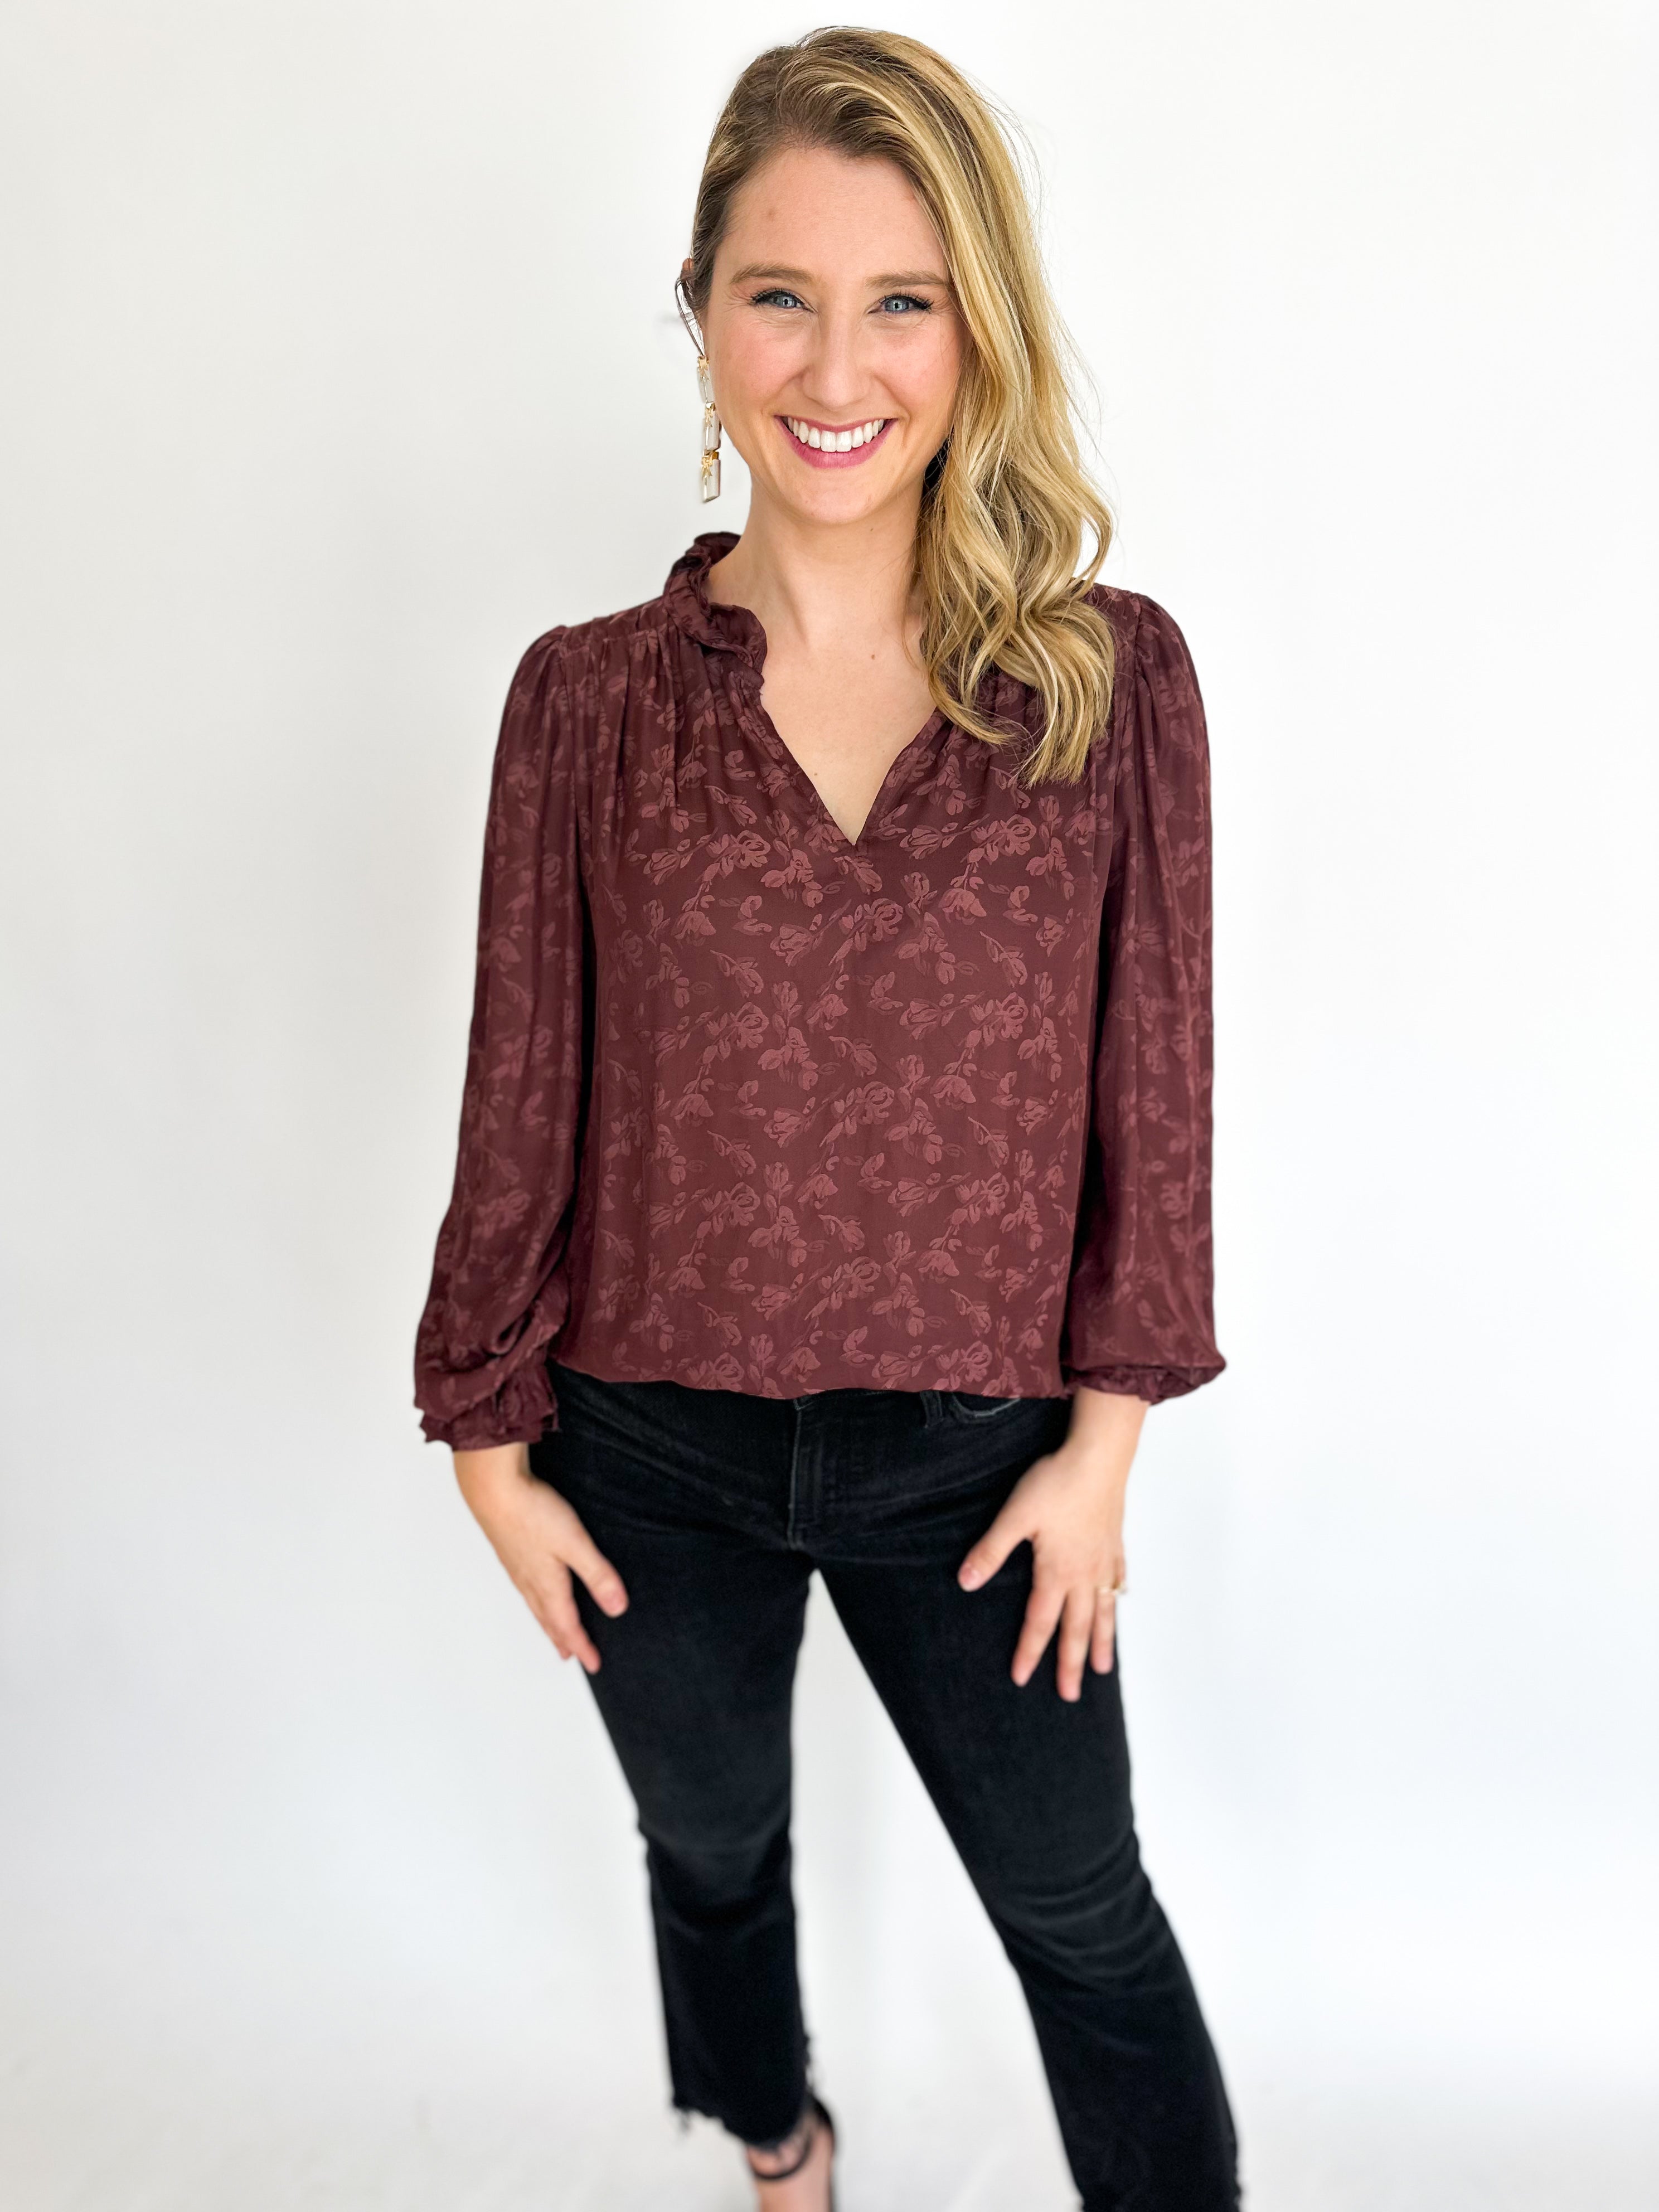 The Last Rose Blouse-200 Fashion Blouses-CURRENT AIR CLOTHING-July & June Women's Fashion Boutique Located in San Antonio, Texas